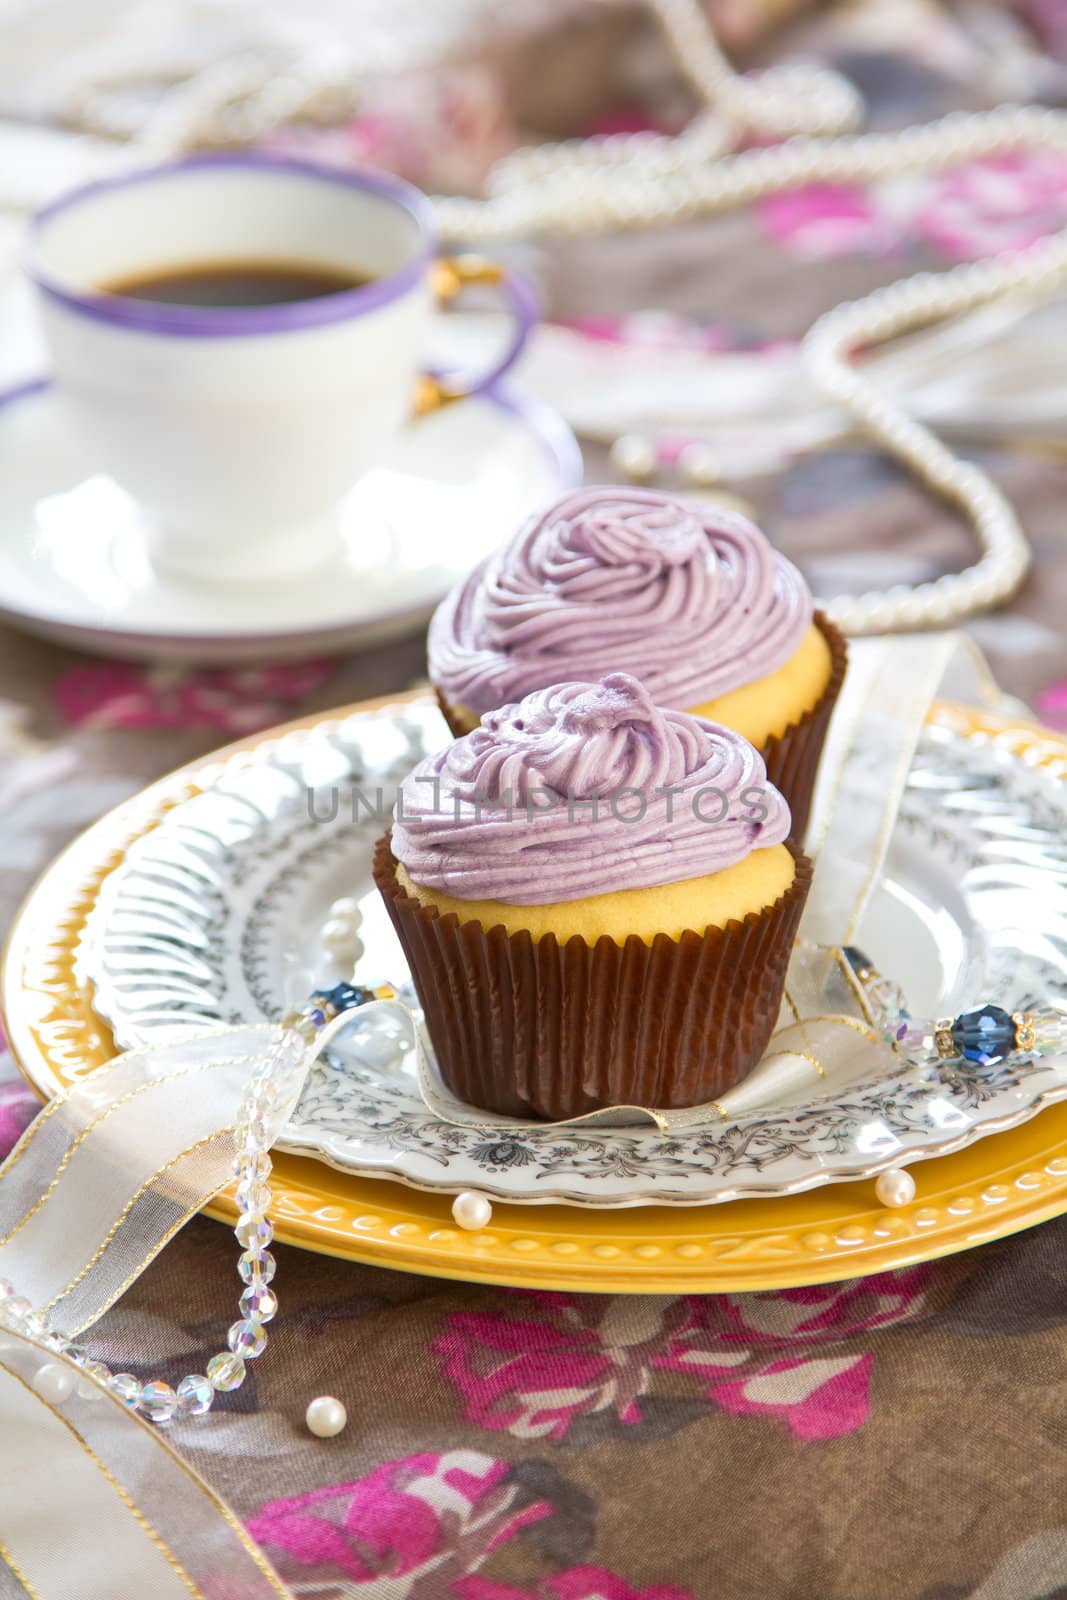 Violet cupcake with violet cream on top by coffee